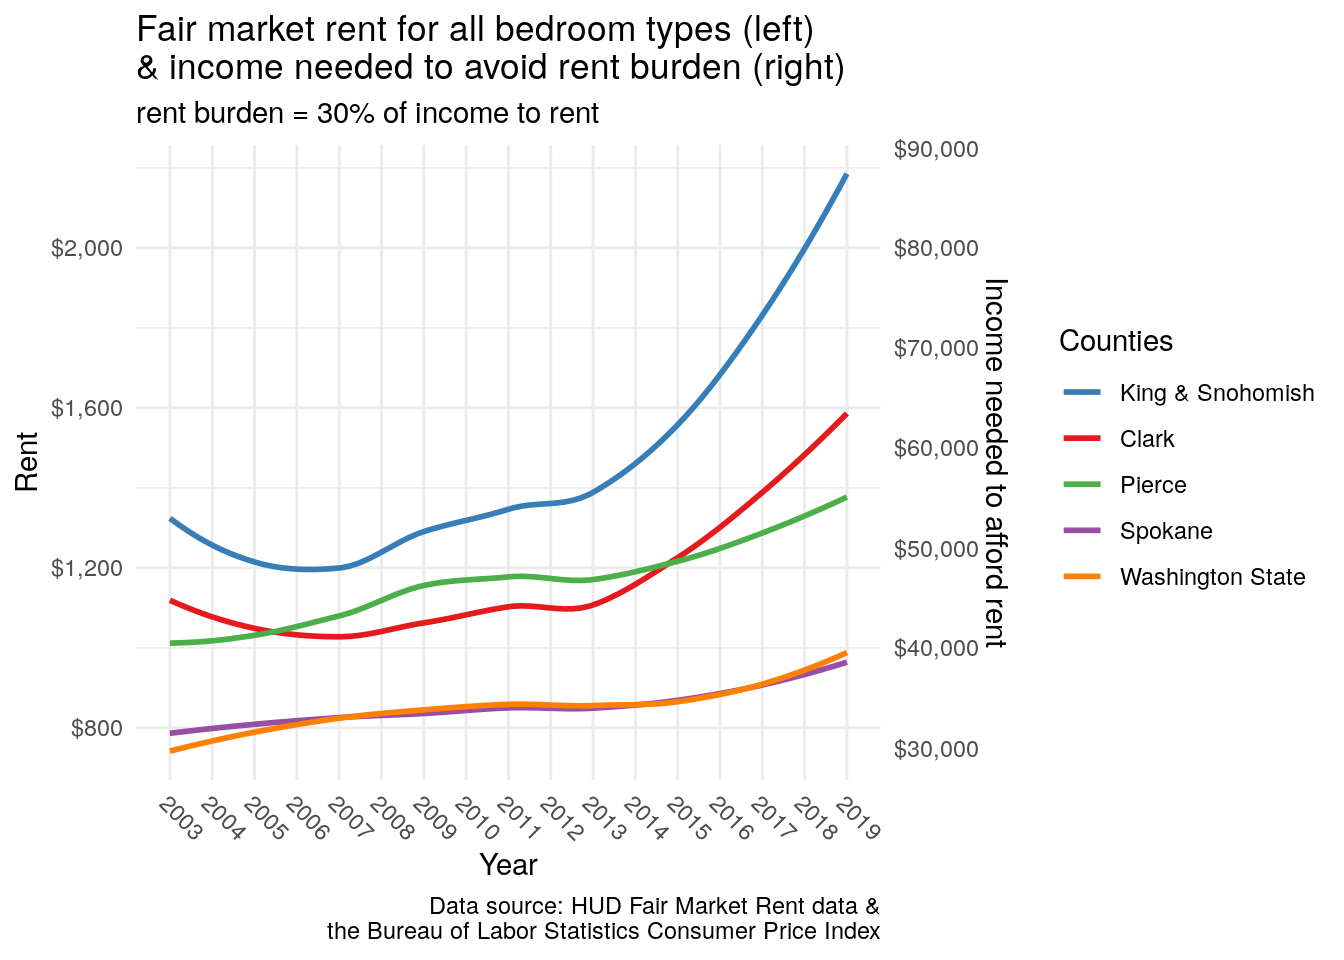 Rents and incomes need to afford rent